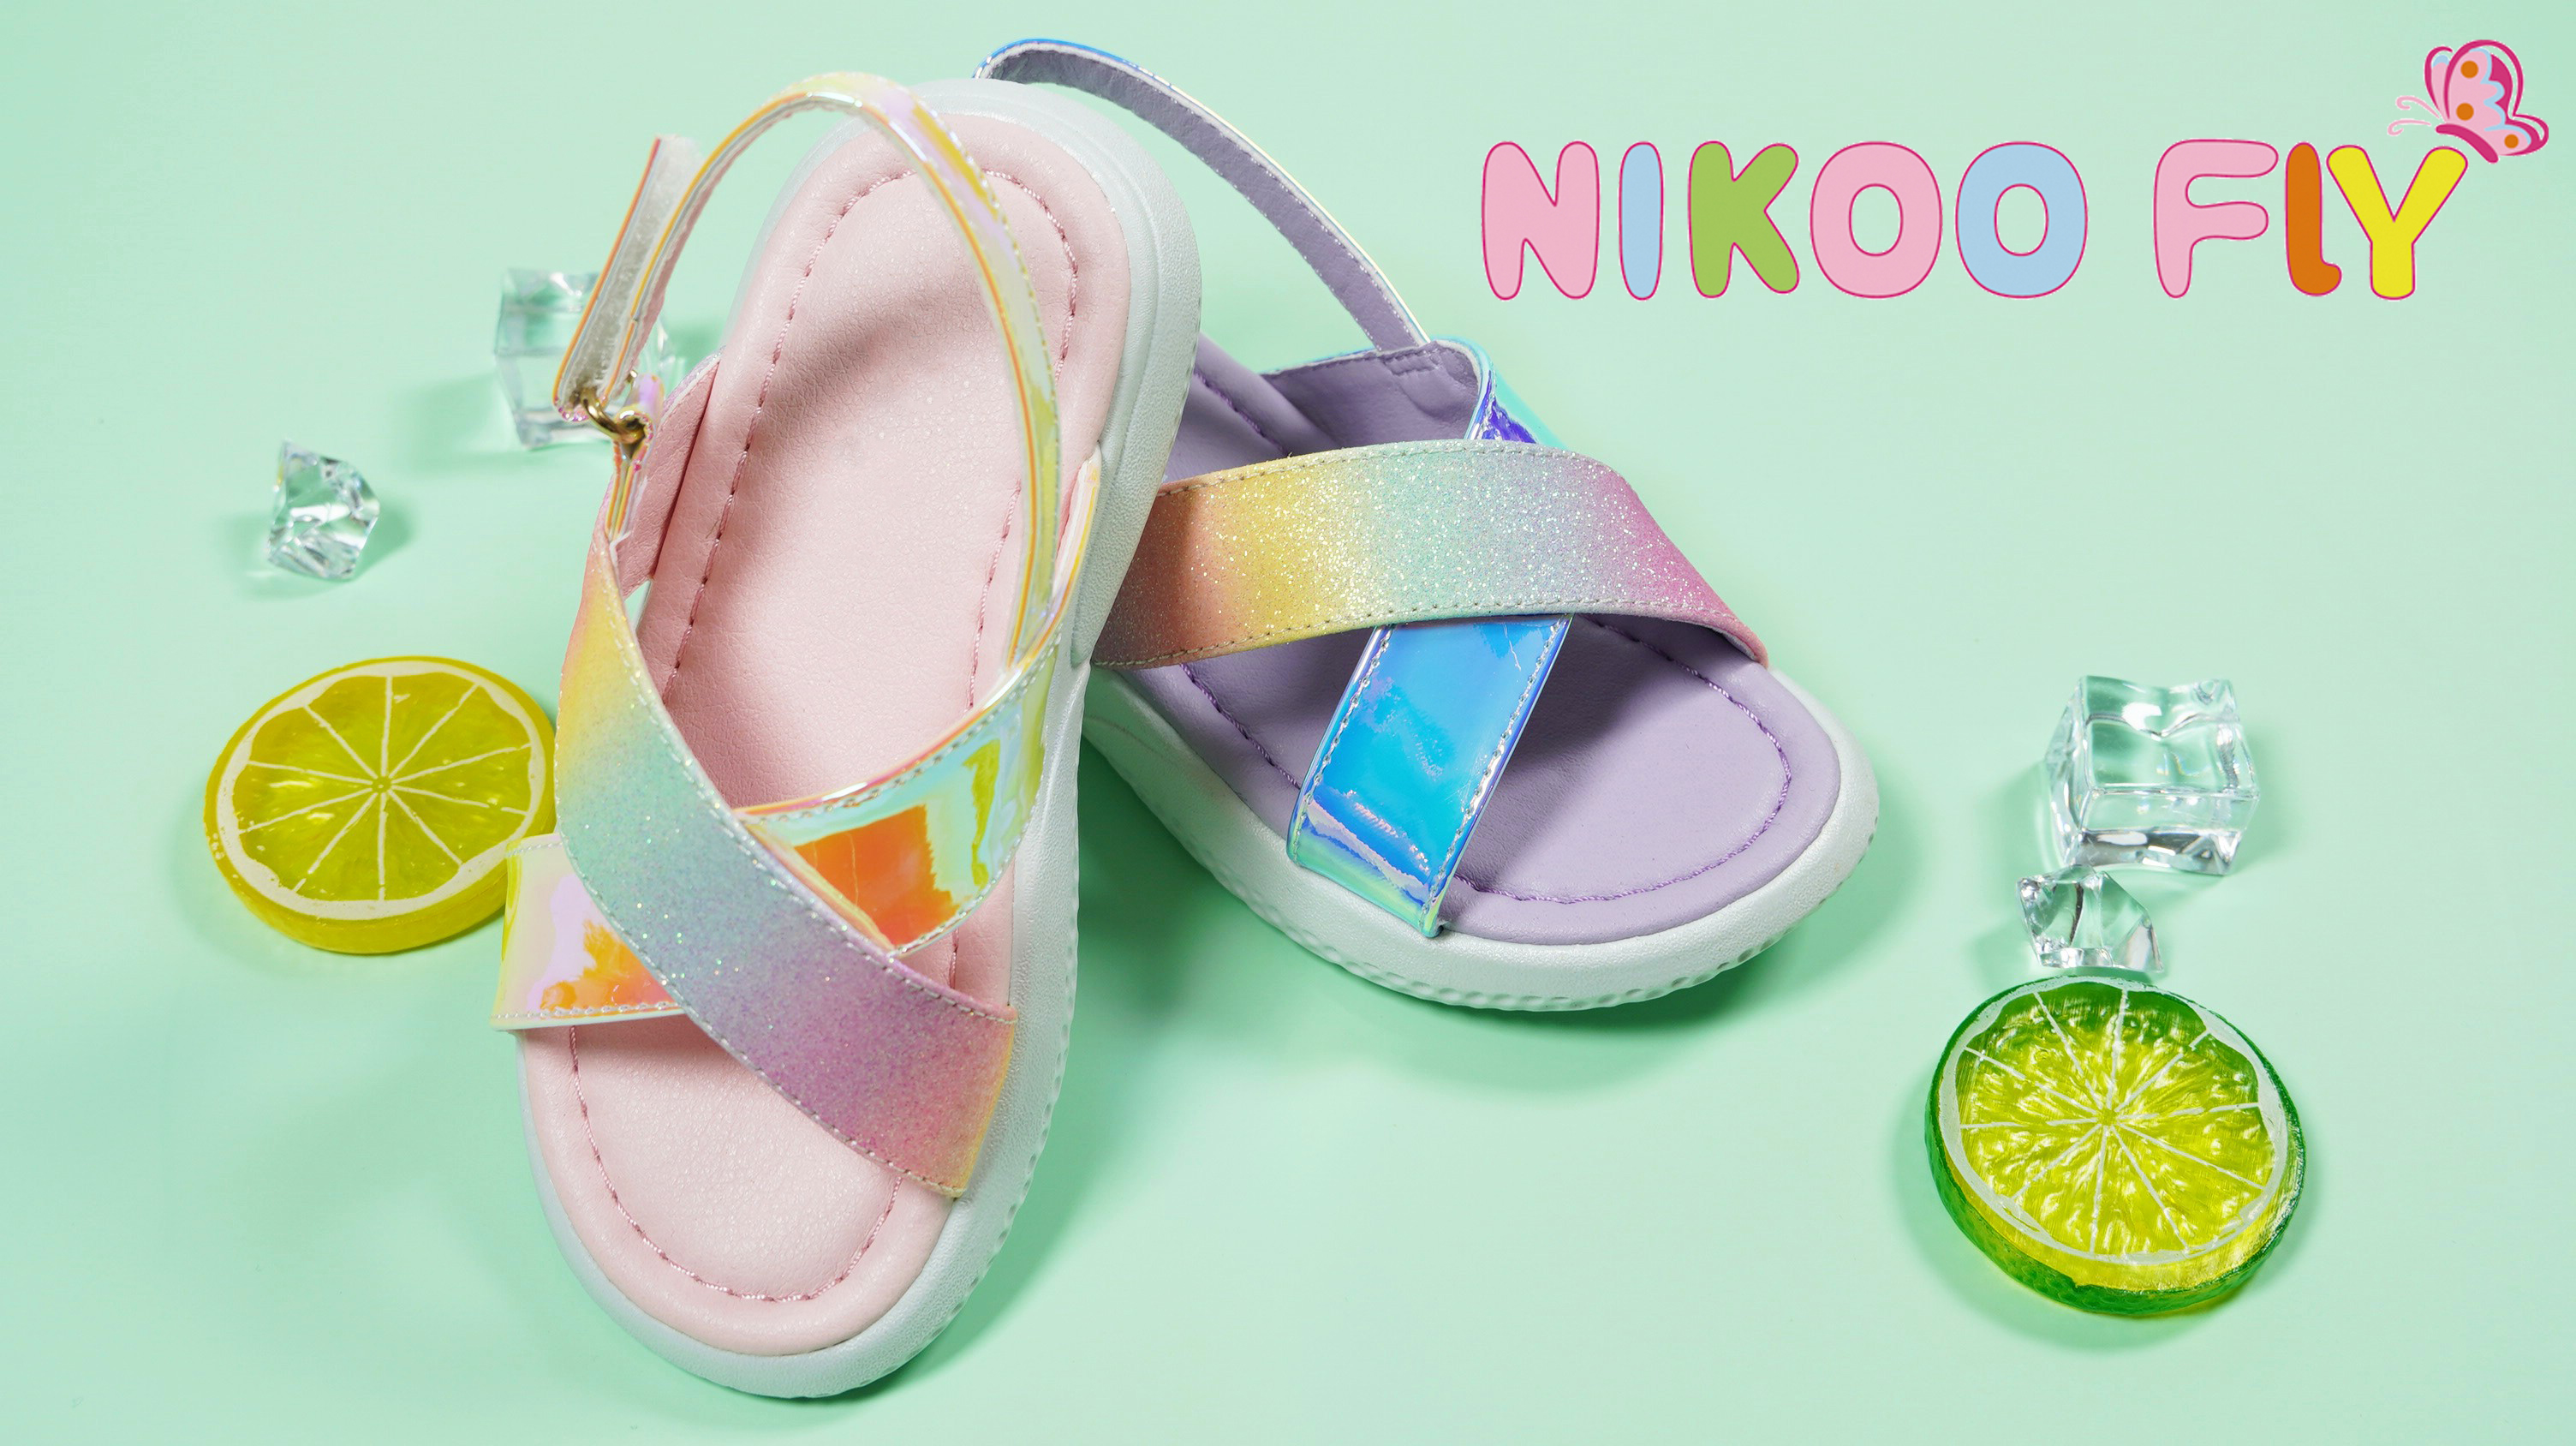 Nikoofly-Hot-Style-Ladies-Casual-Sandals-Latest-Ladies-Holographic-Designs-Sandals-YDX516G-1